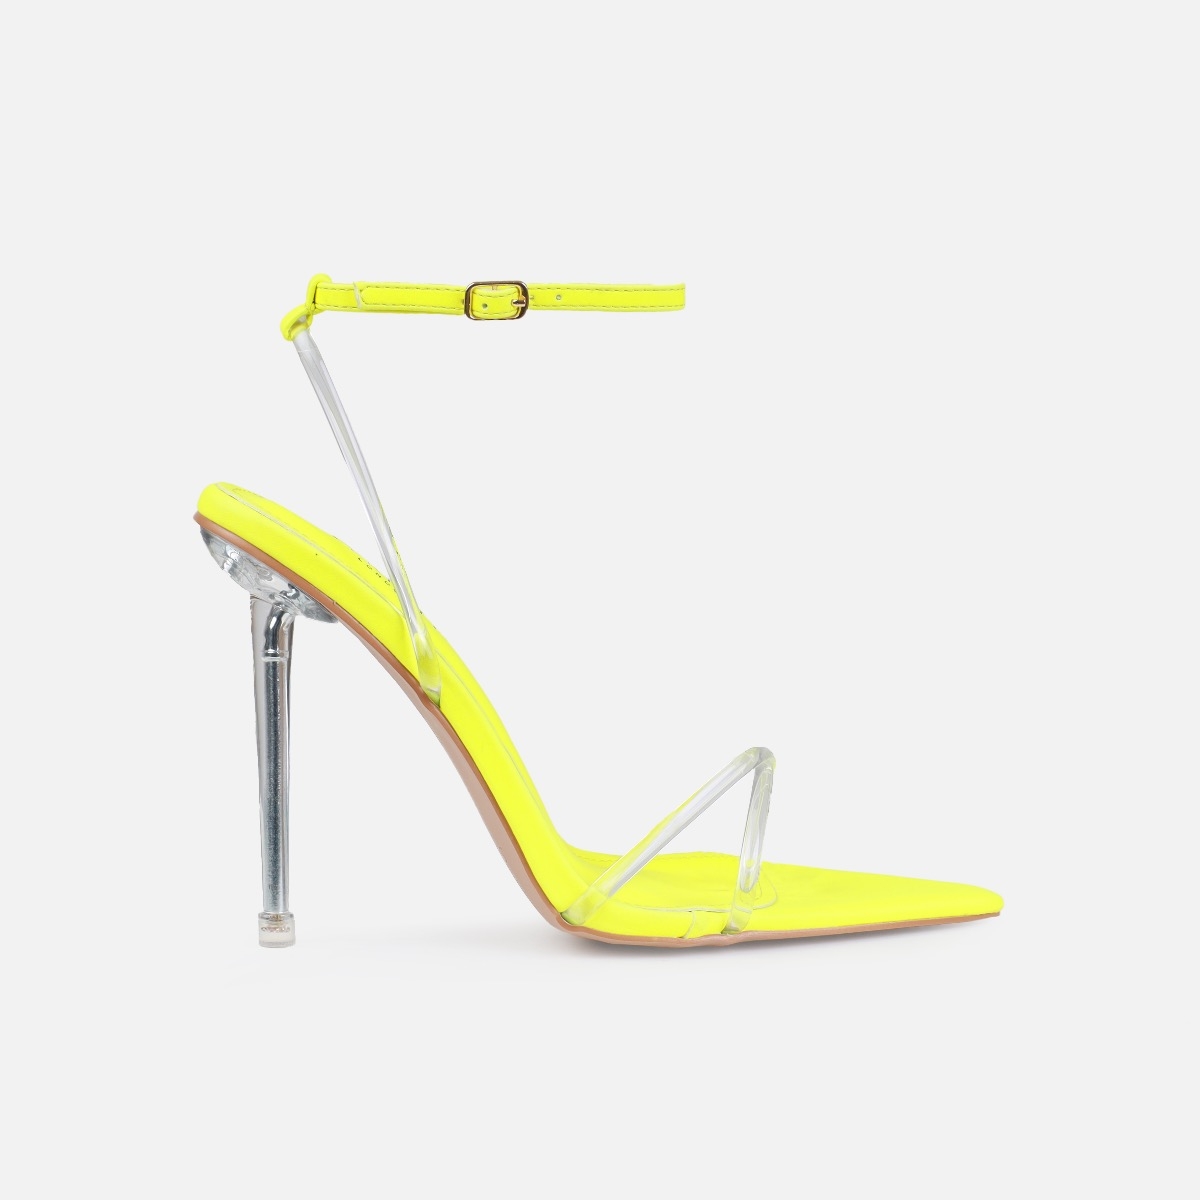 New Neon Yellow Strappy Heels Size 7 - $9 New With Tags - From Allison